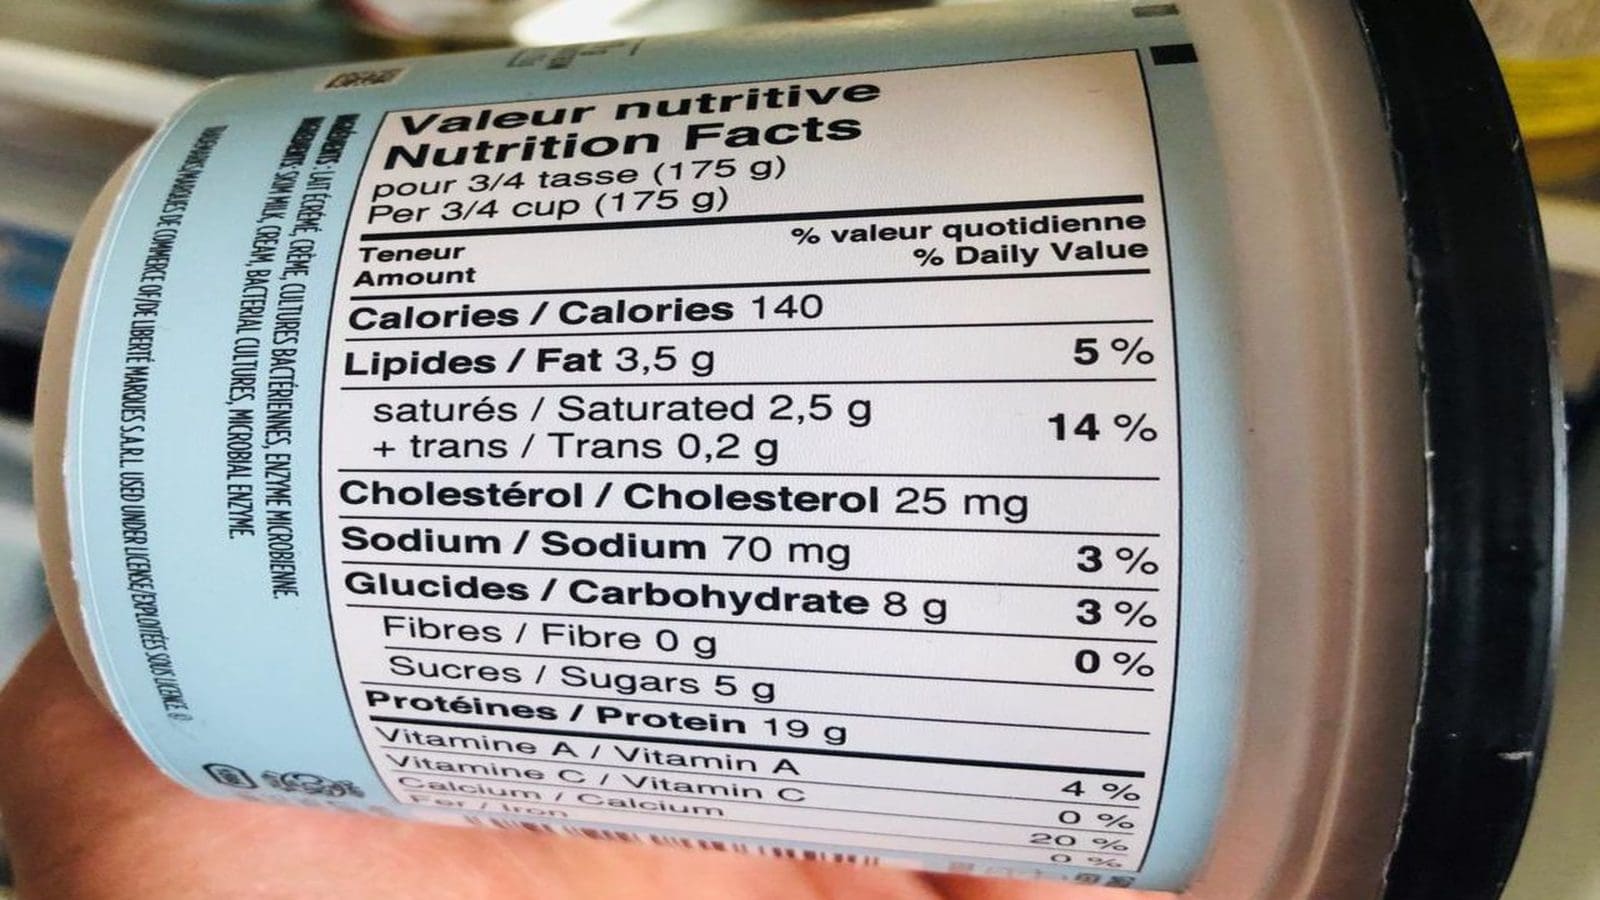 Kerry unveils new digital tool to assess front-of-pack nutrition labels